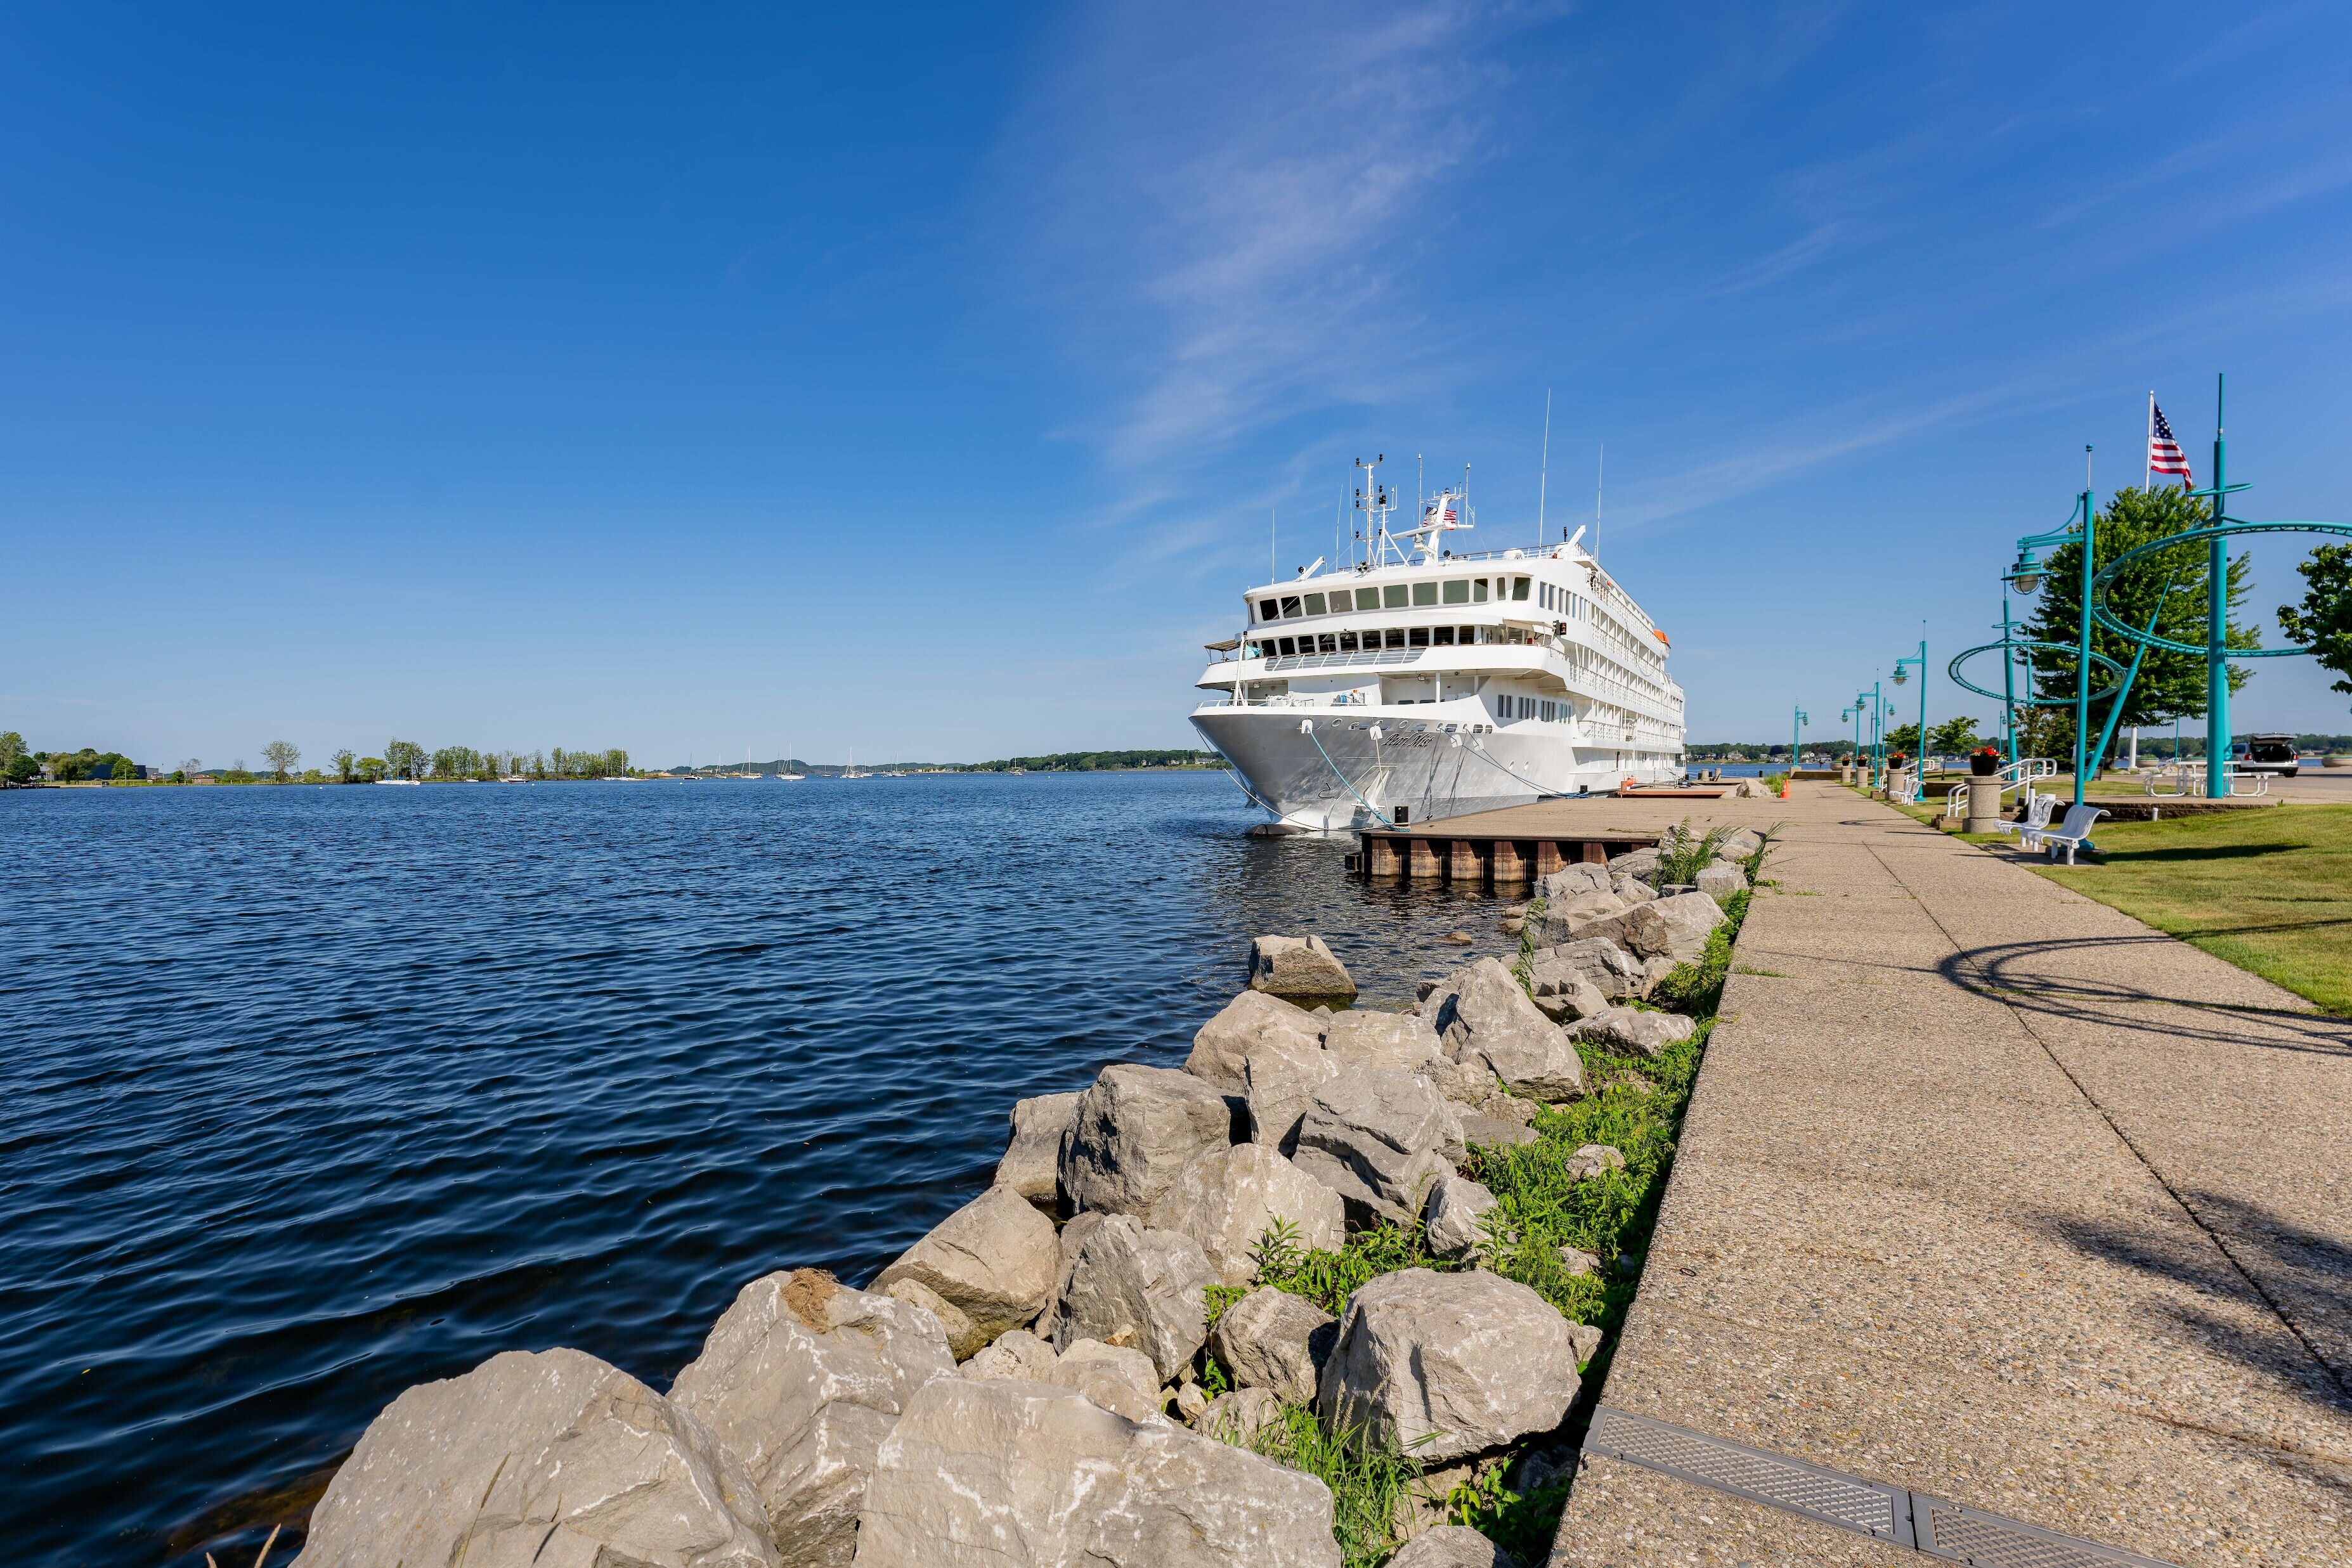 The Pearl Mist docks in Muskegon for a day.